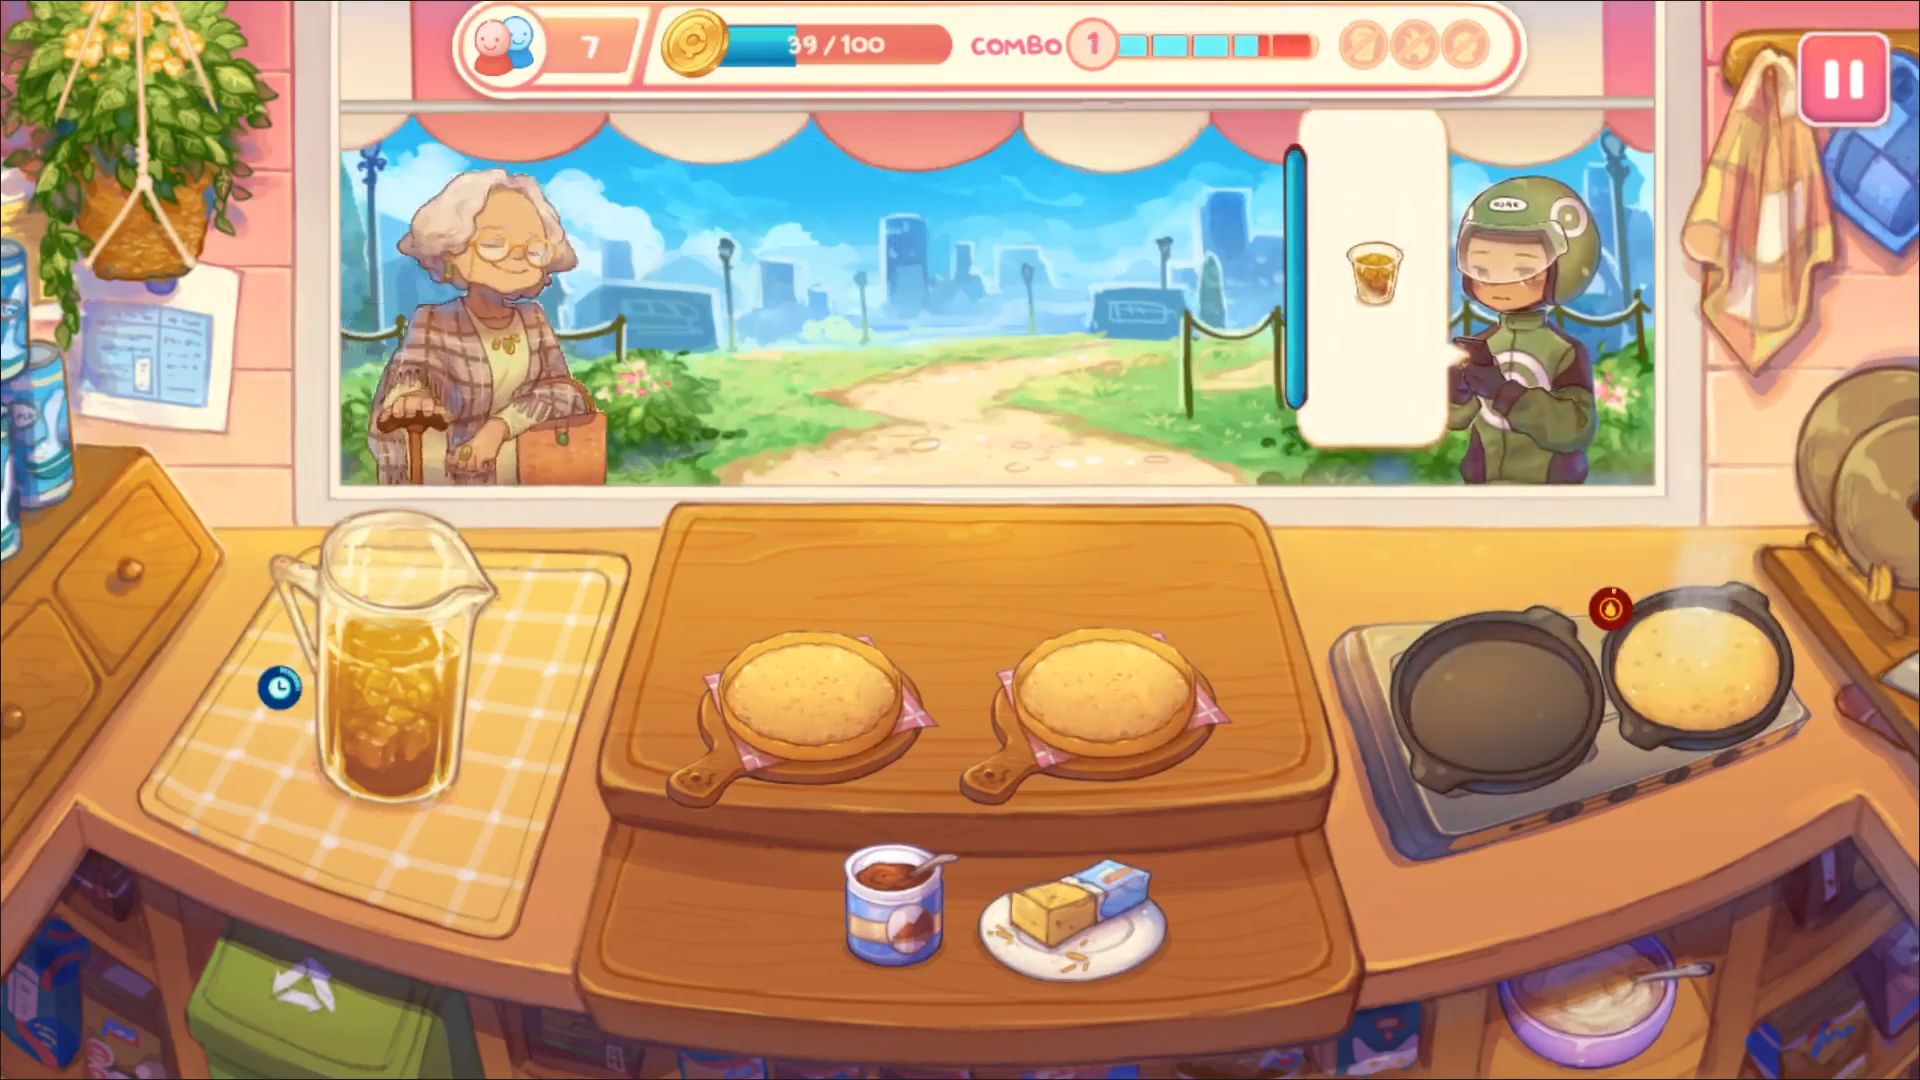 Download Cooking Chef Story: Food Park für Android kostenlos.